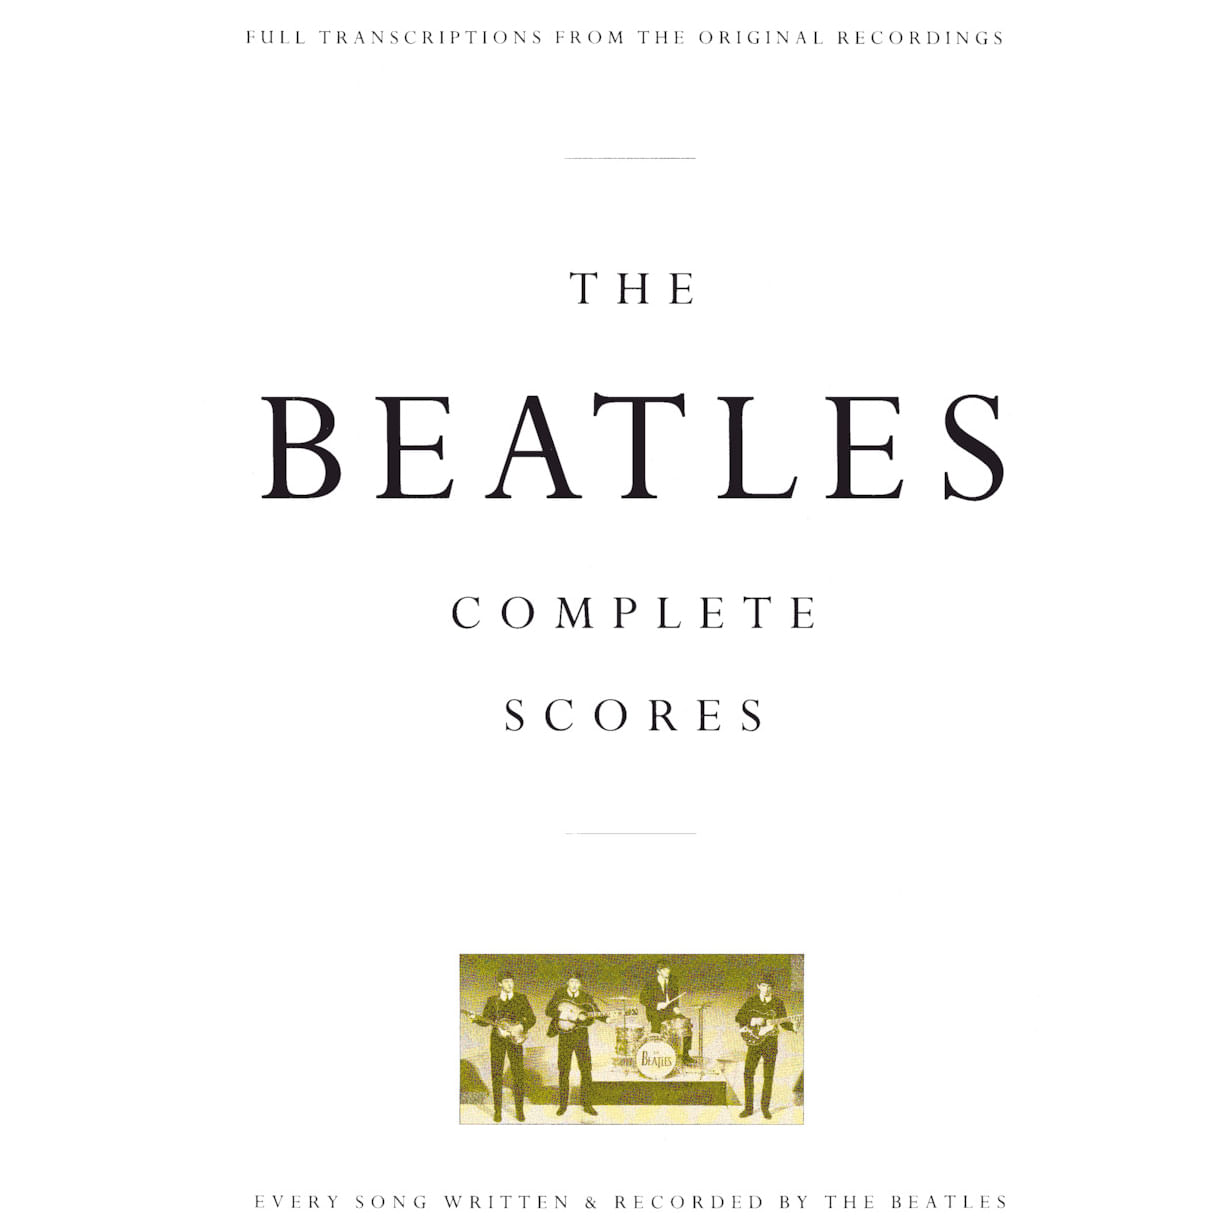 The Beatles – Complete Scores - Cosmo Music | Canada's #1 Music Store -  Shop, Rent, Repair